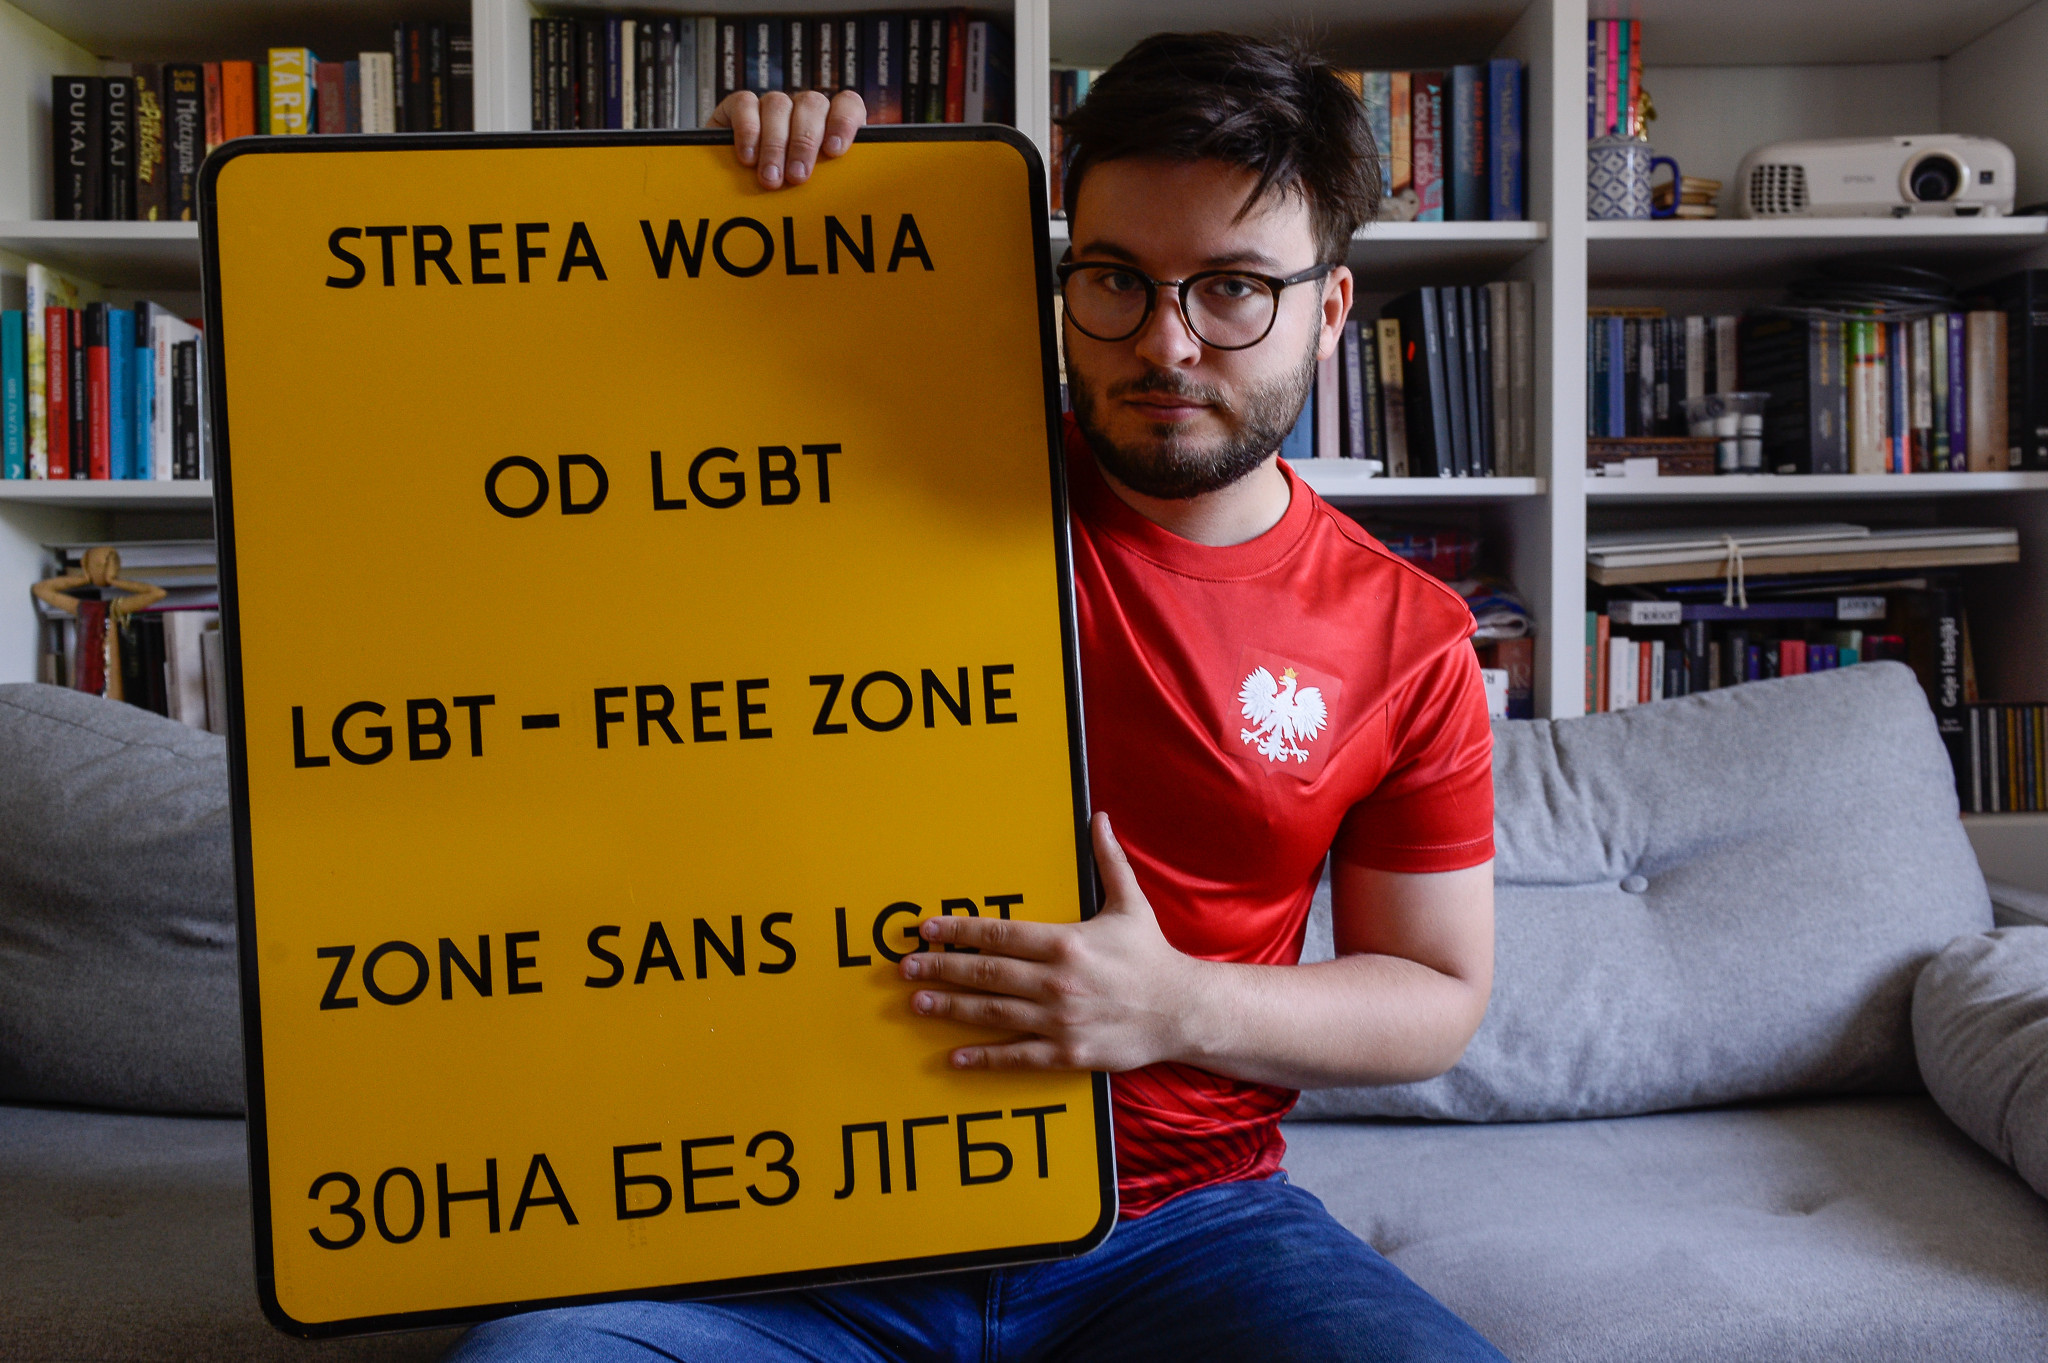 The LGBTQ+ community has limited rights in Poland, something that the 2023 European Games cannot change according to EOC President Spyros Capralos ©Getty Images